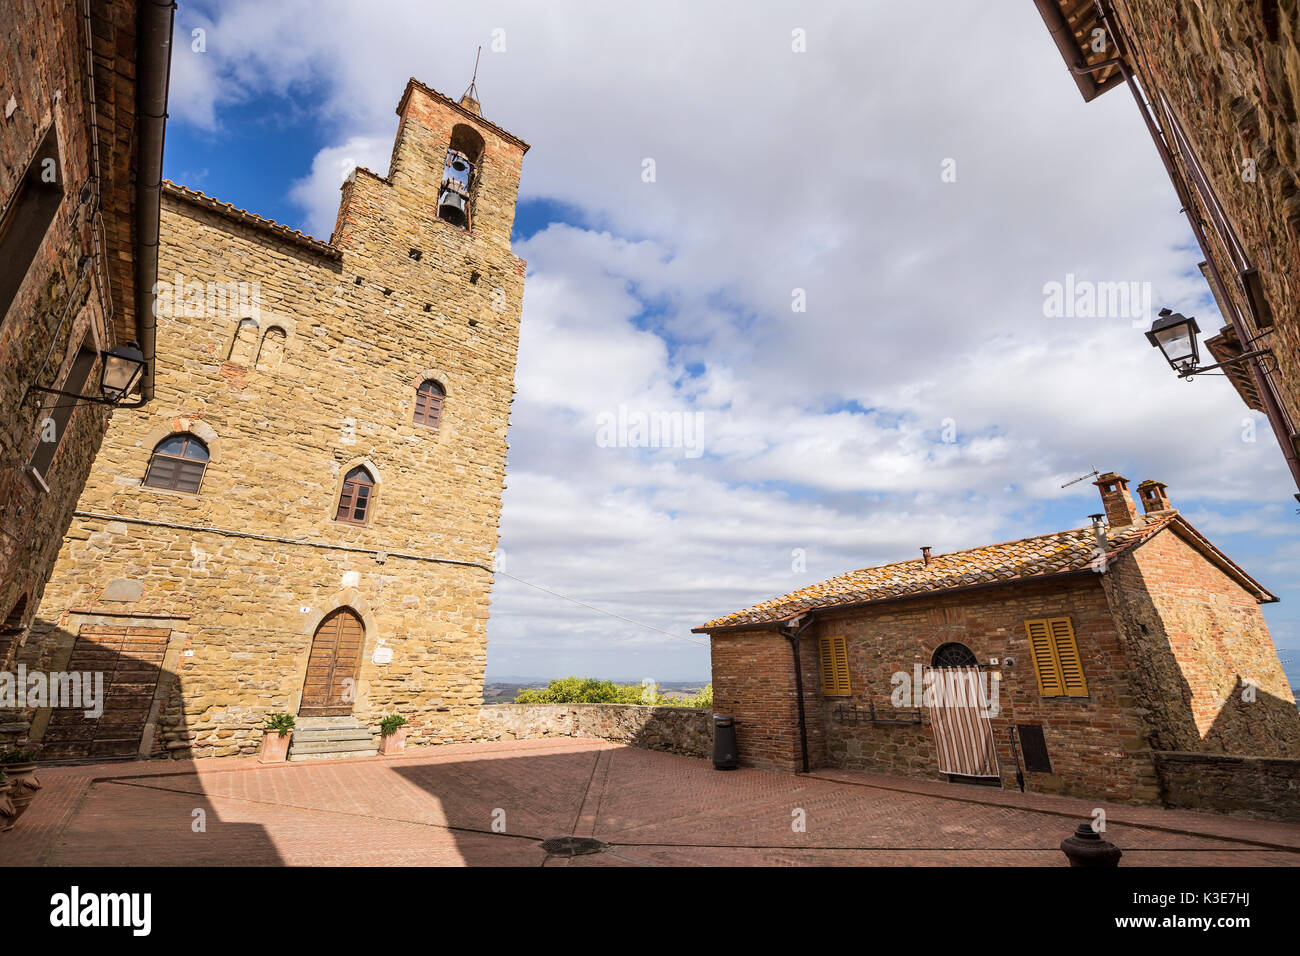 Panicale, one of the most beautiful villages in Italy. Stock Photo